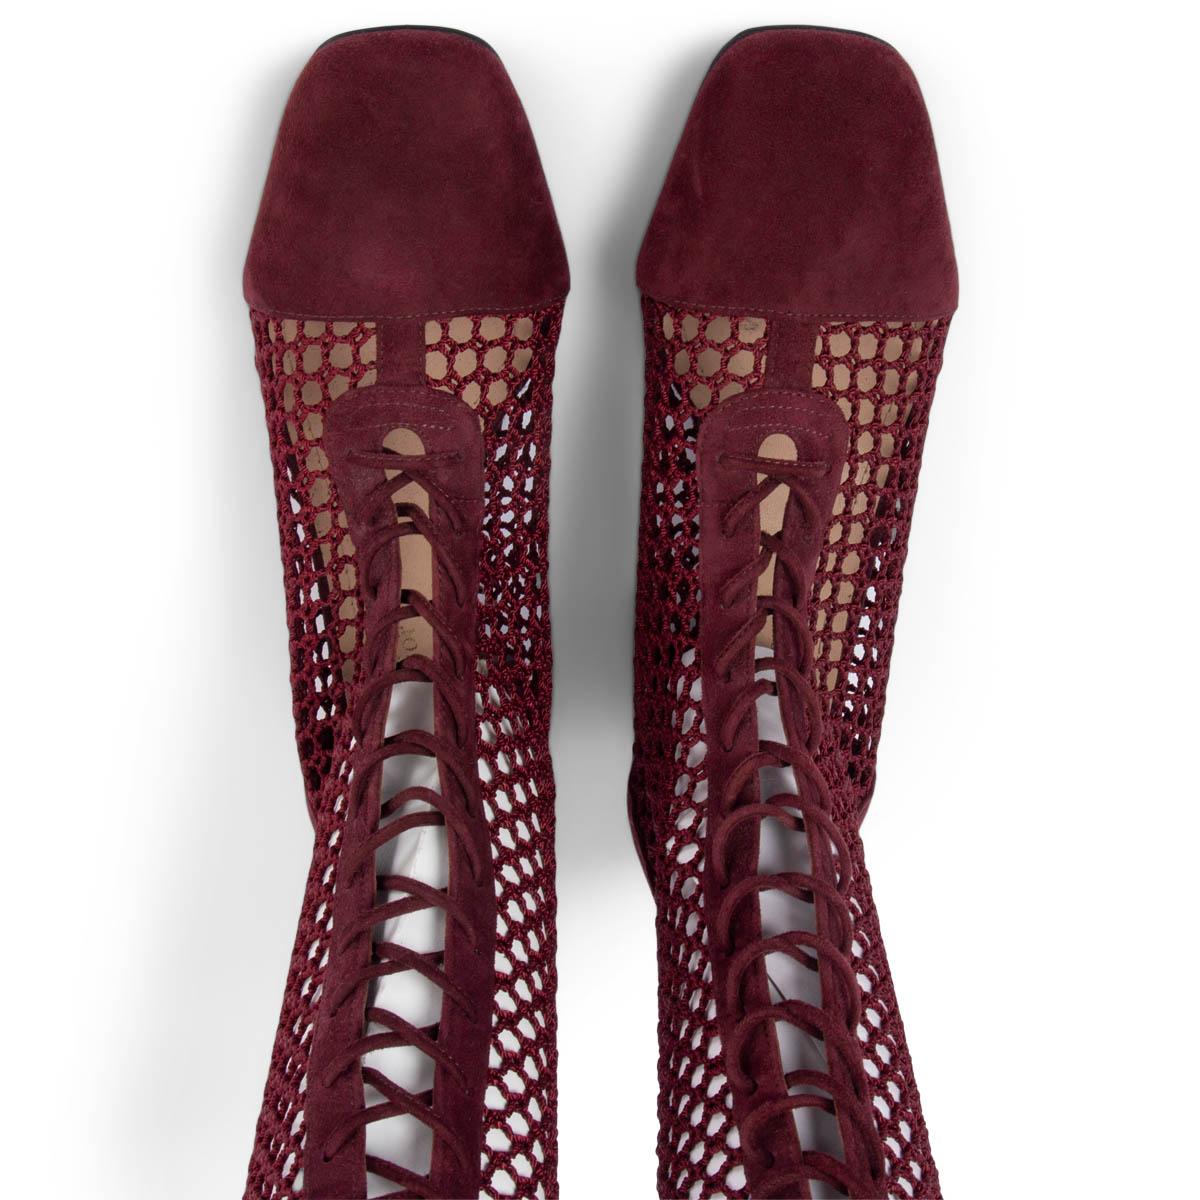 CHRISTIAN DIOR burgundy suede 2018 NAUGHTILY-D FISHNET Boots Shoes 38.5 2